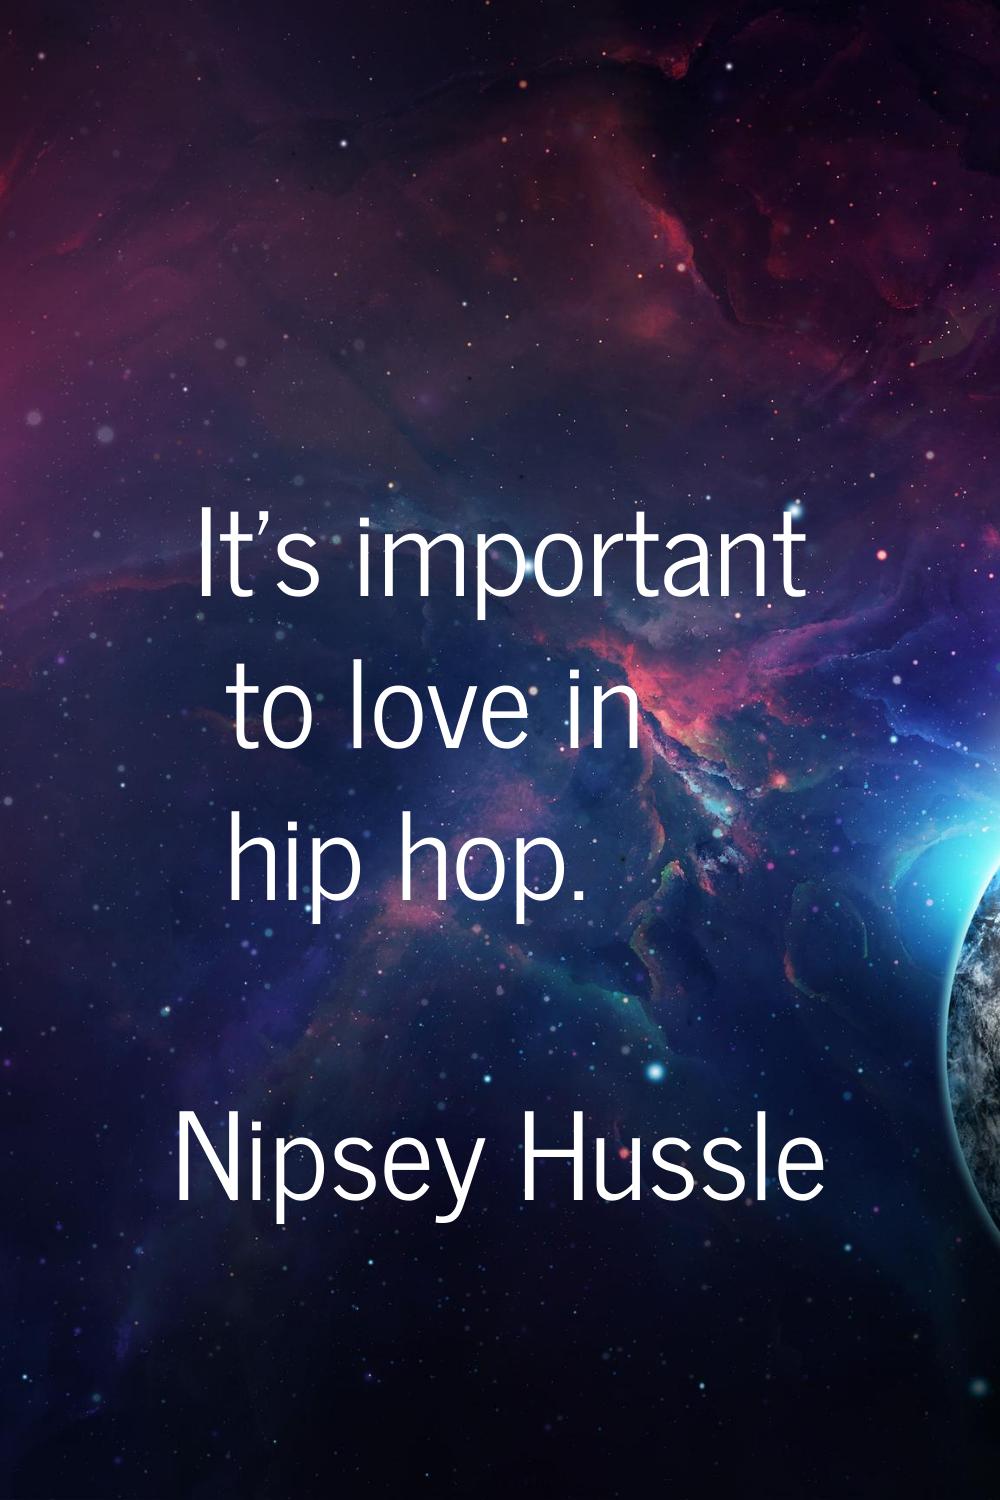 It's important to love in hip hop.